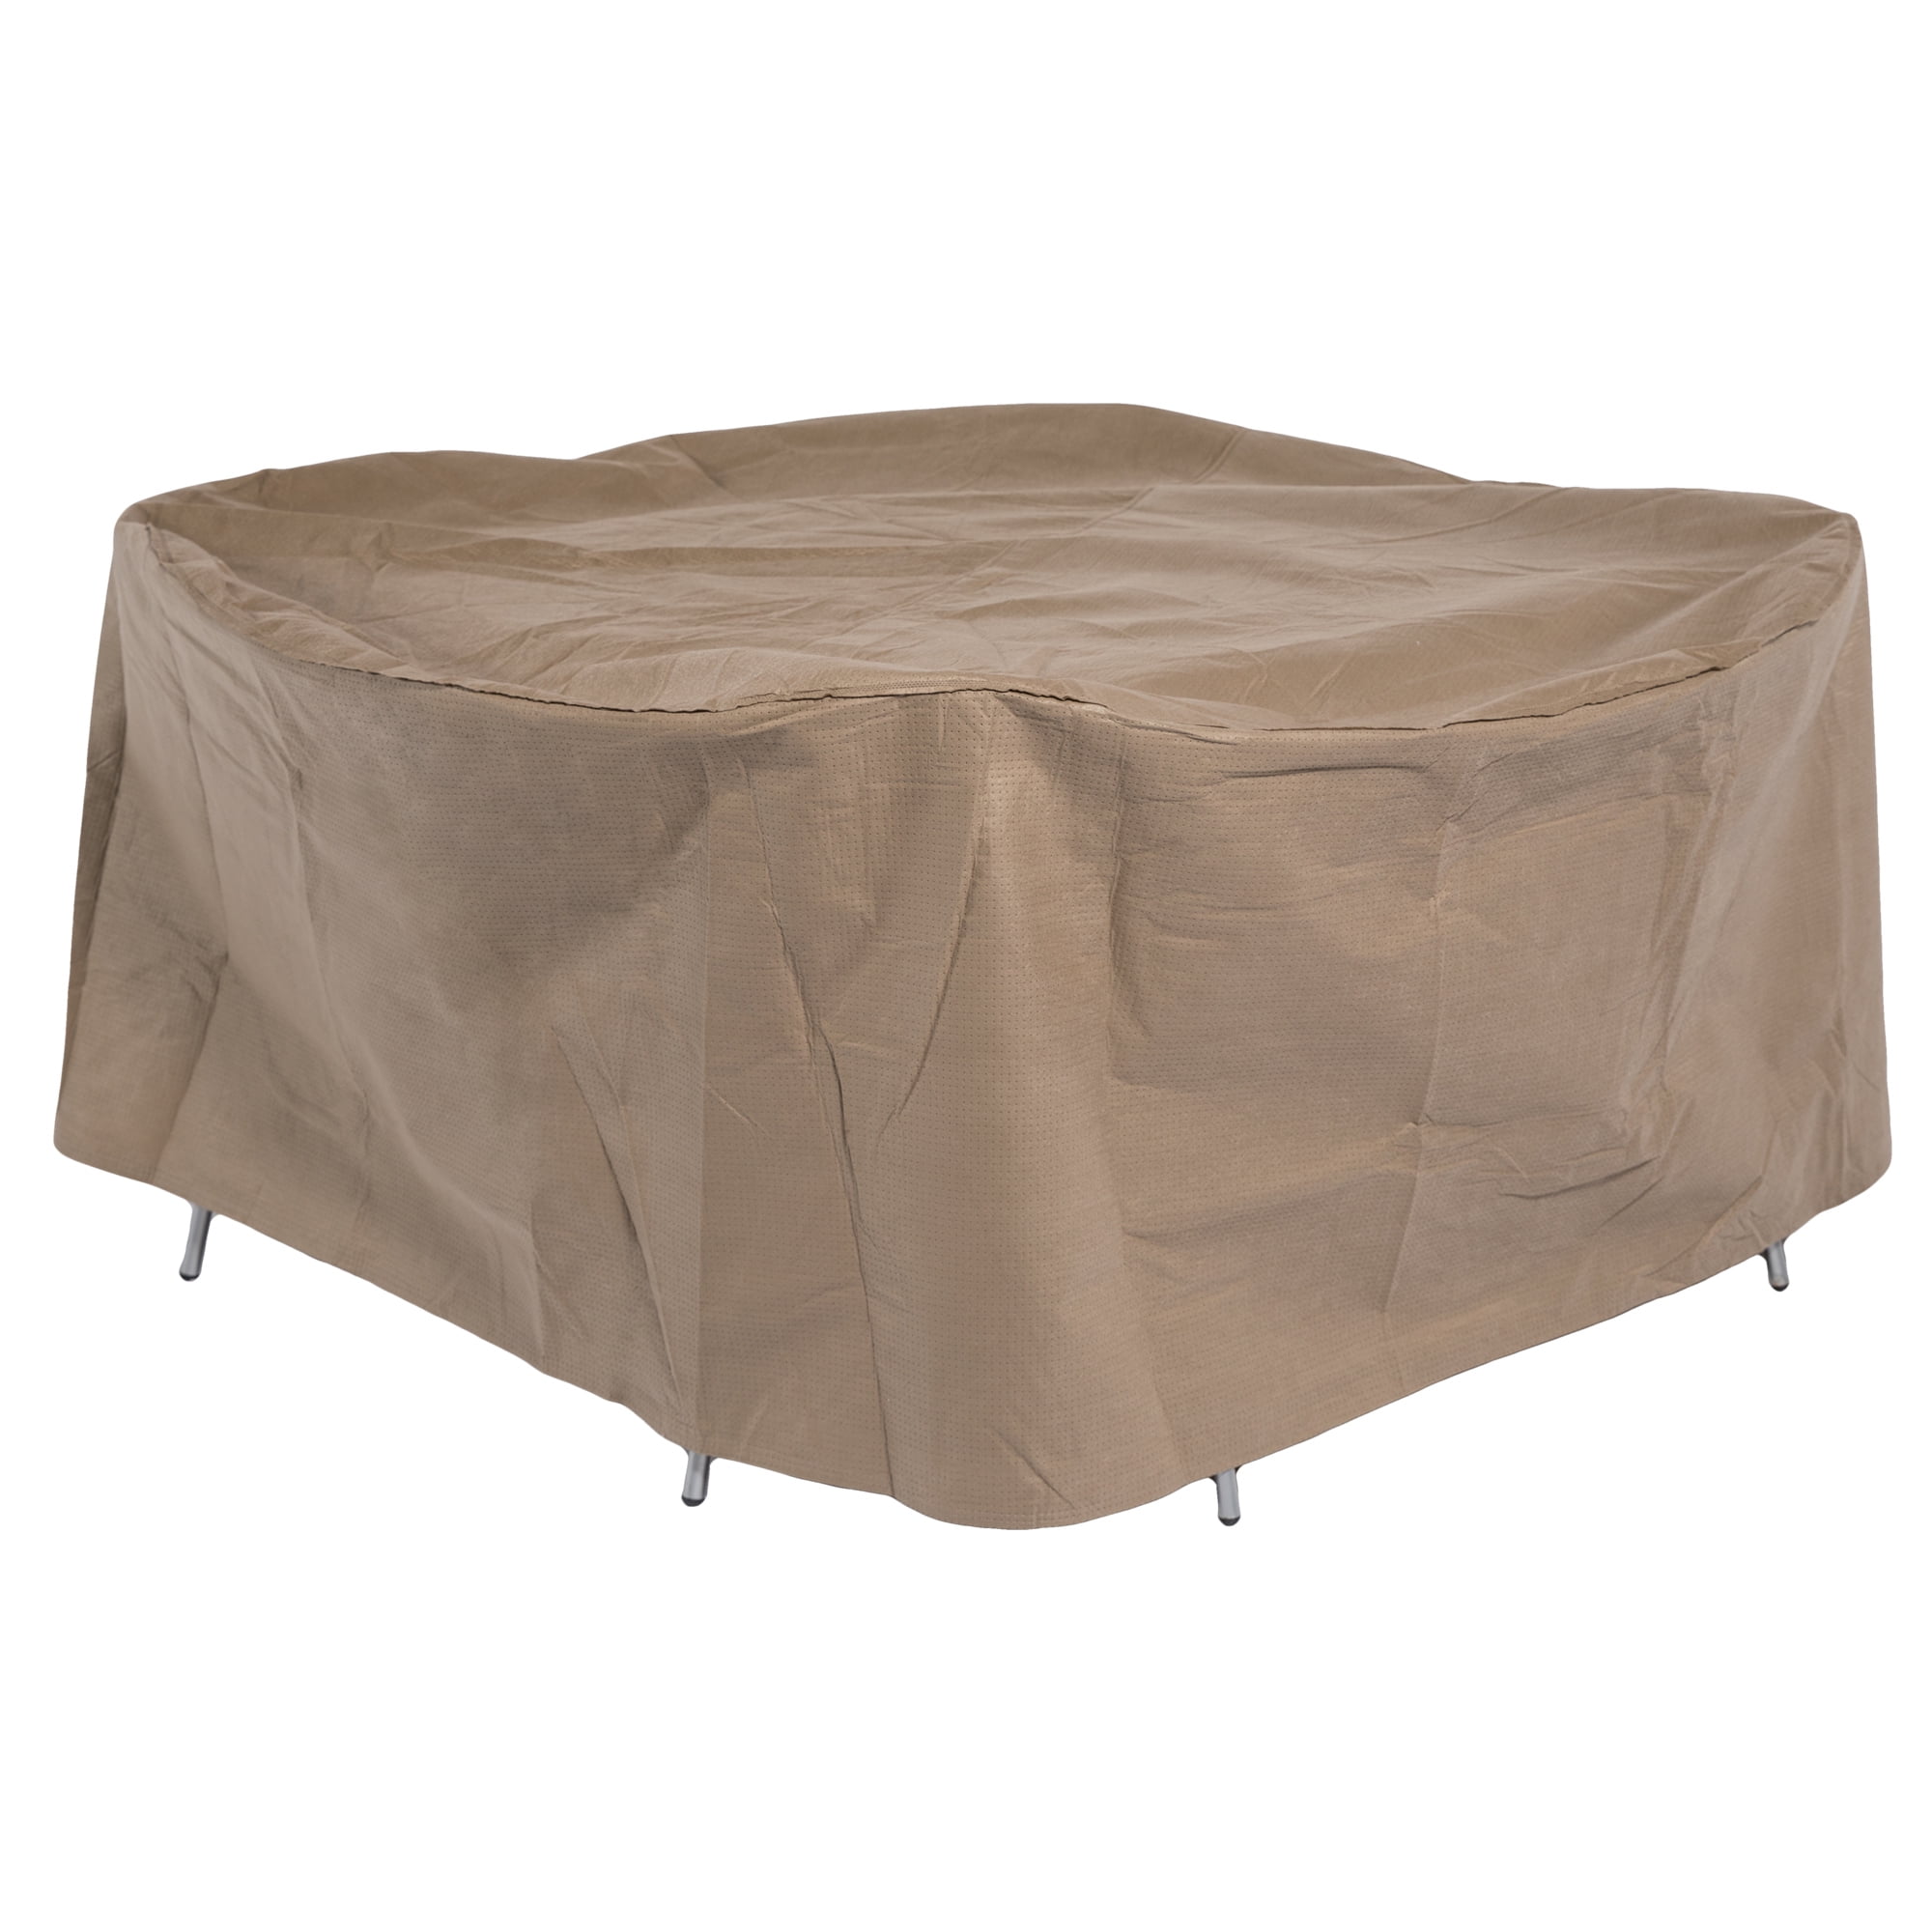 41 by 41 by 18-Inch Taupe KoverRoos III 34266 40-Inch Square Table Cover